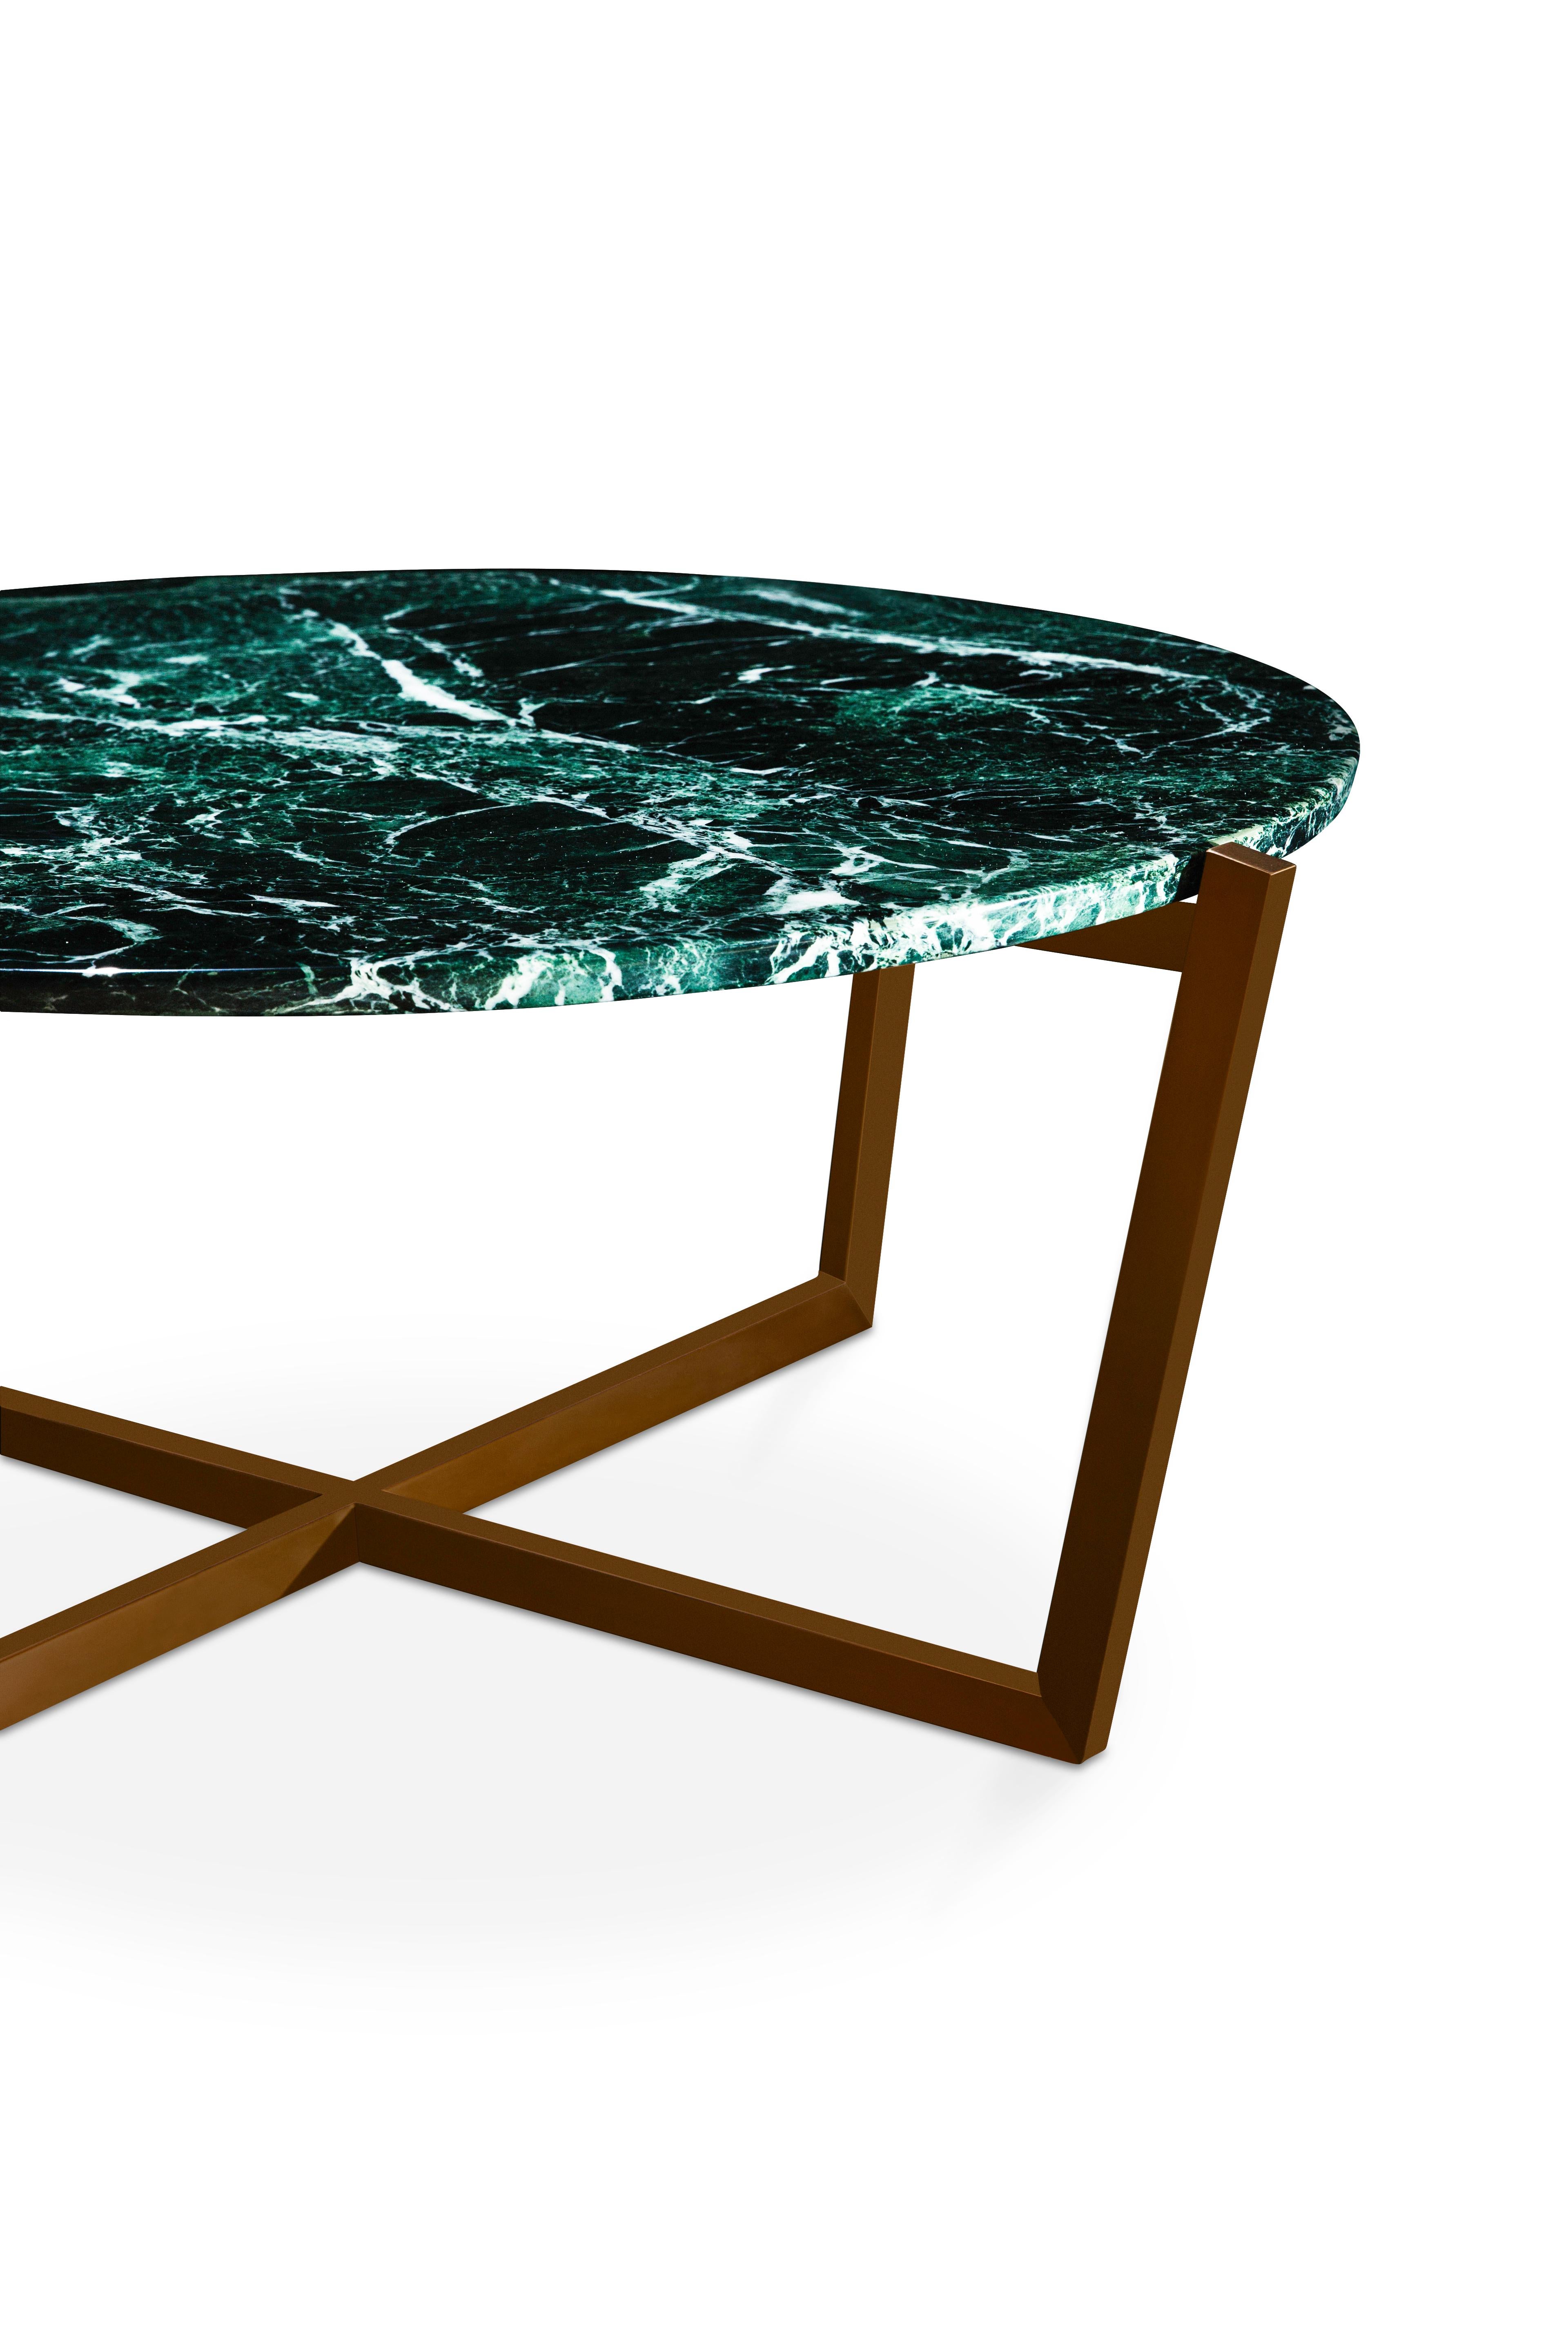 NORDST EMMA Coffee Table, Italian Green Lightning Marble, Danish Modern Design In New Condition For Sale In Rungsted Kyst, DK